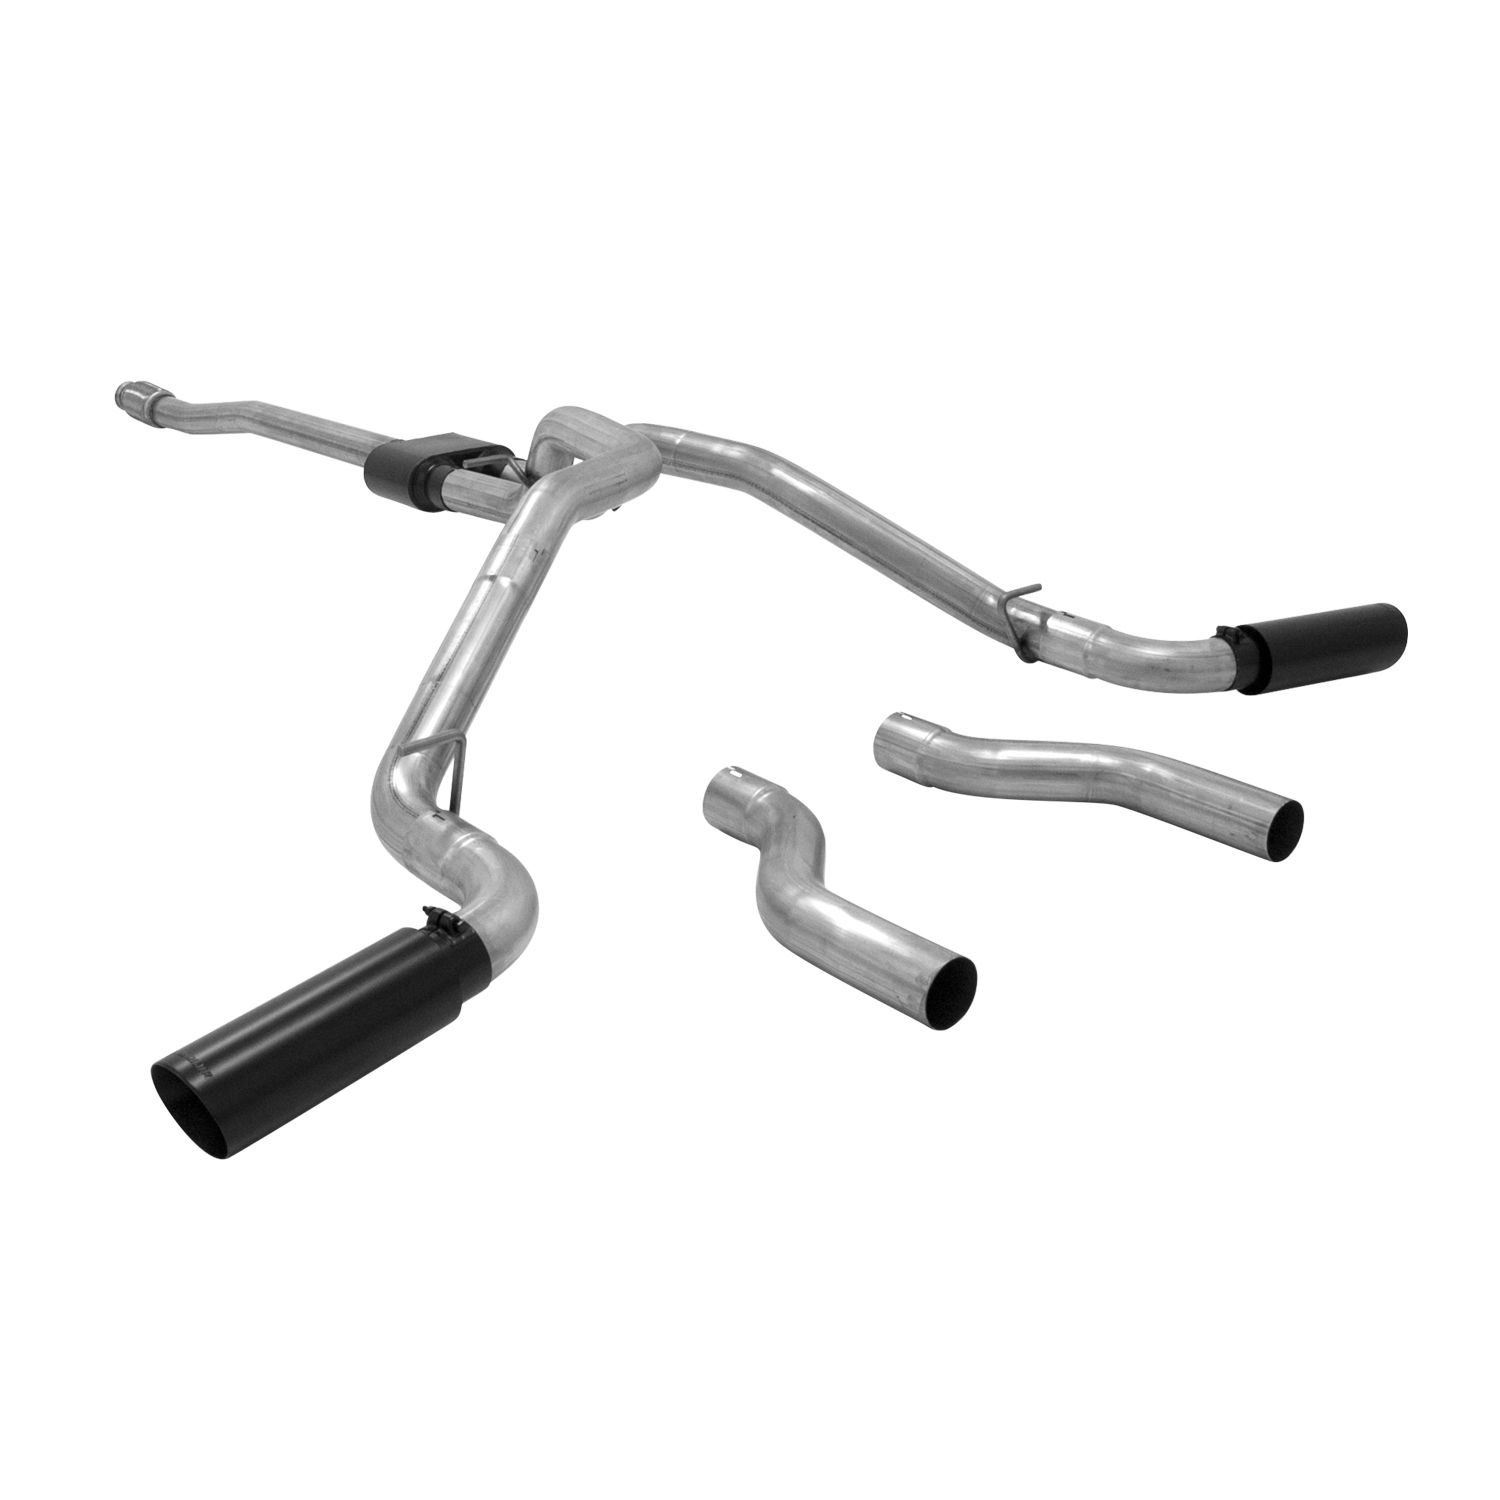 2009-2013 GMC Sierra 1500 5.3L 4DR Crew Cab/EXT Cab Flowmaster Outlaw Cat-Back Exhaust